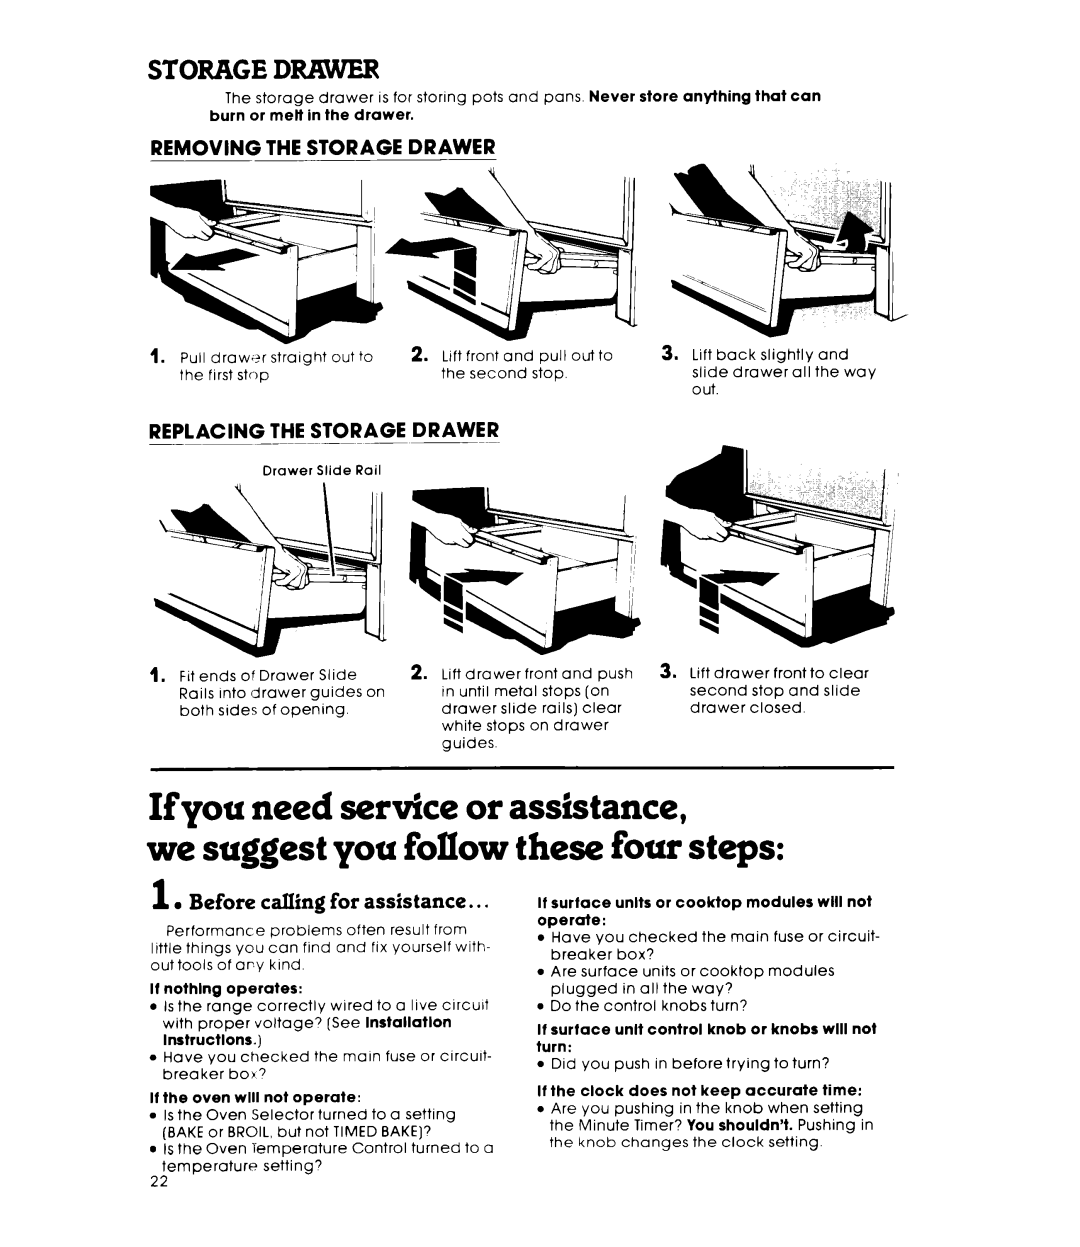 Whirlpool RS576PXL manual If you need service or assistance, we suggest you follow these four steps, Storagedrawer 